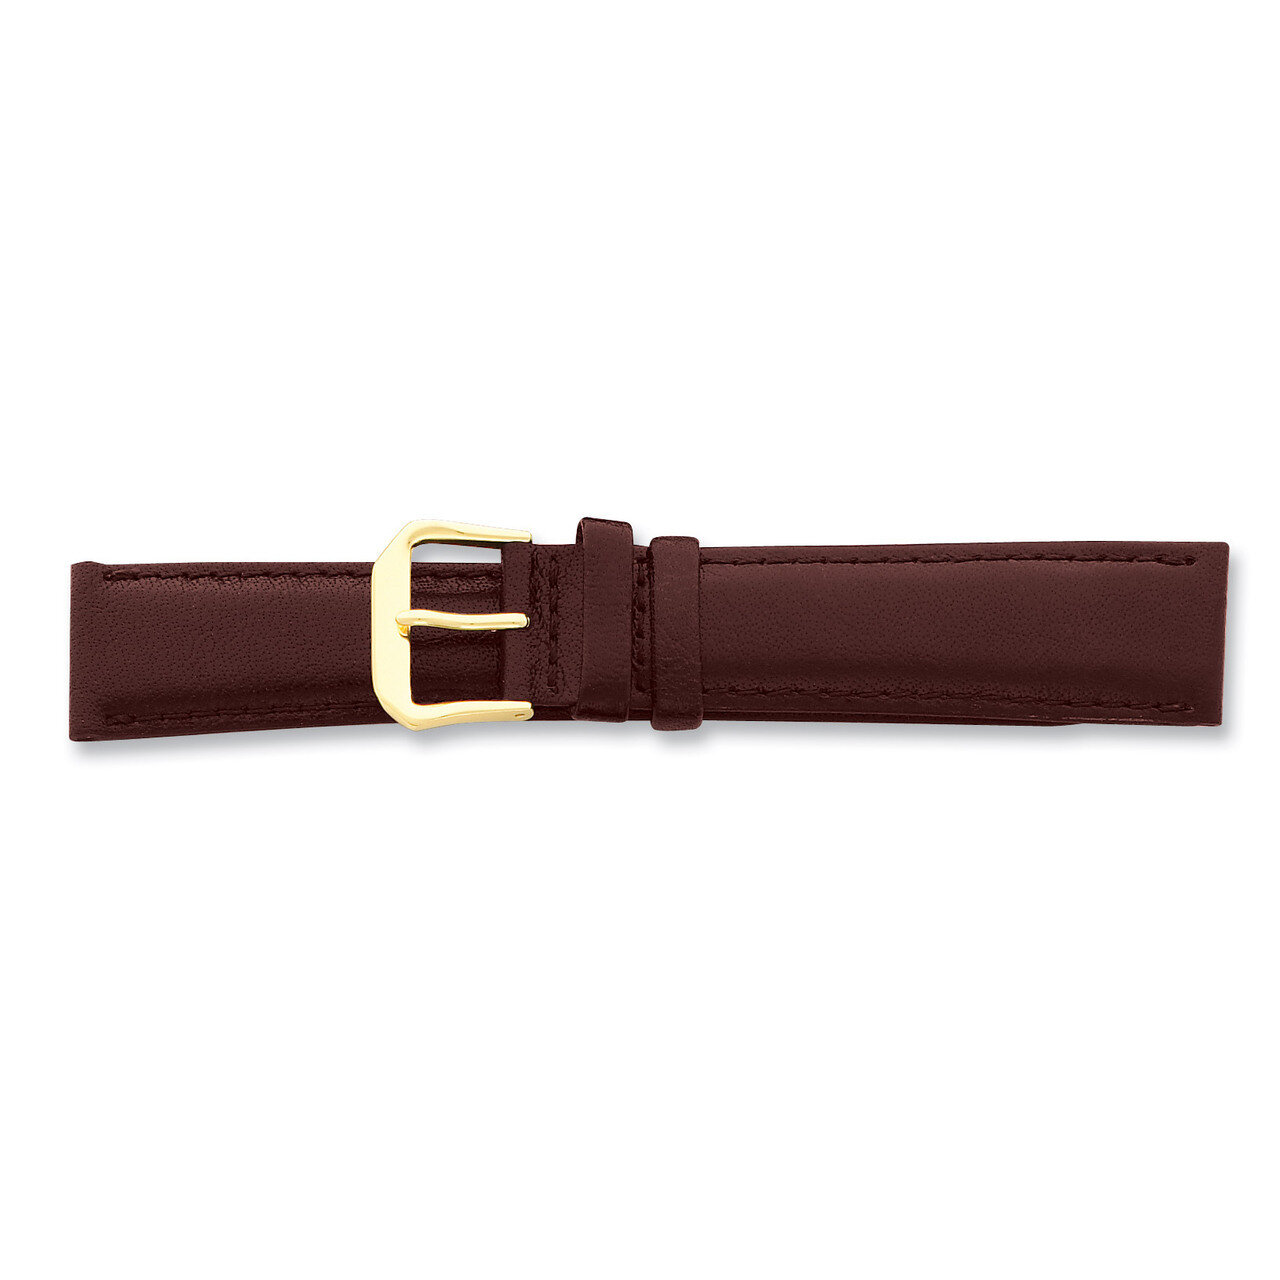 12mm Long Brown Smooth Leather Gld-tone Buckle Watch Band BA84L-12